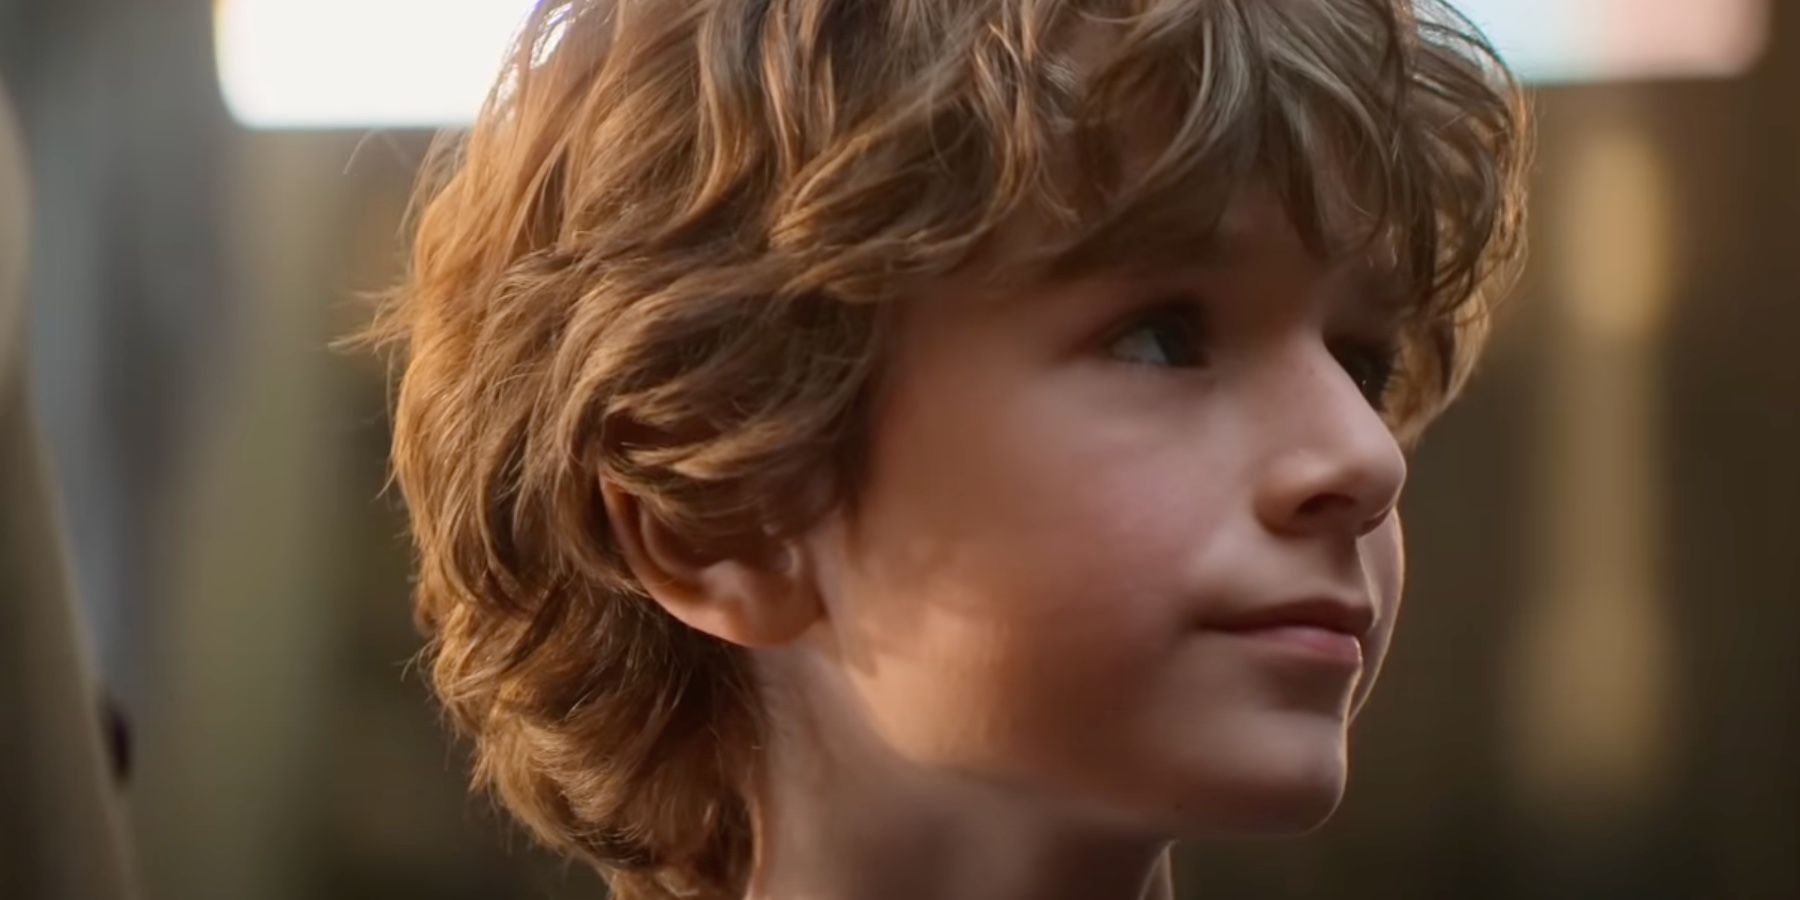 Azriel Dalman as Young Percy Jackson in Disney's Percy Jackson and the Olympians episode 1